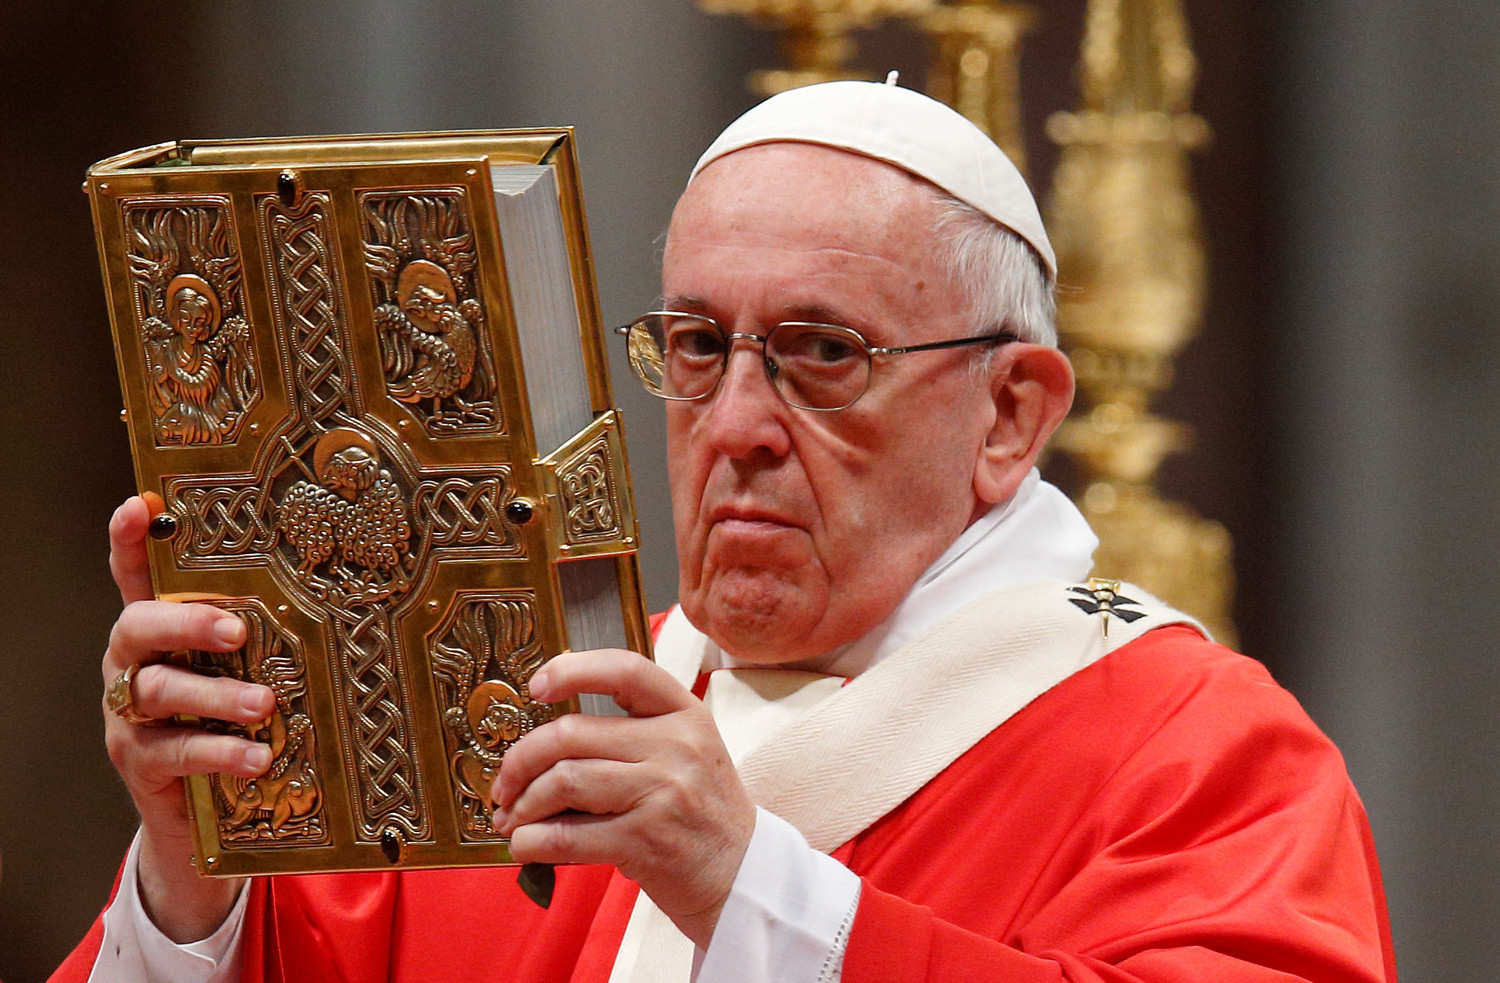 The Holy Spirit changes hearts, Pope says on Pentecost The Missourian